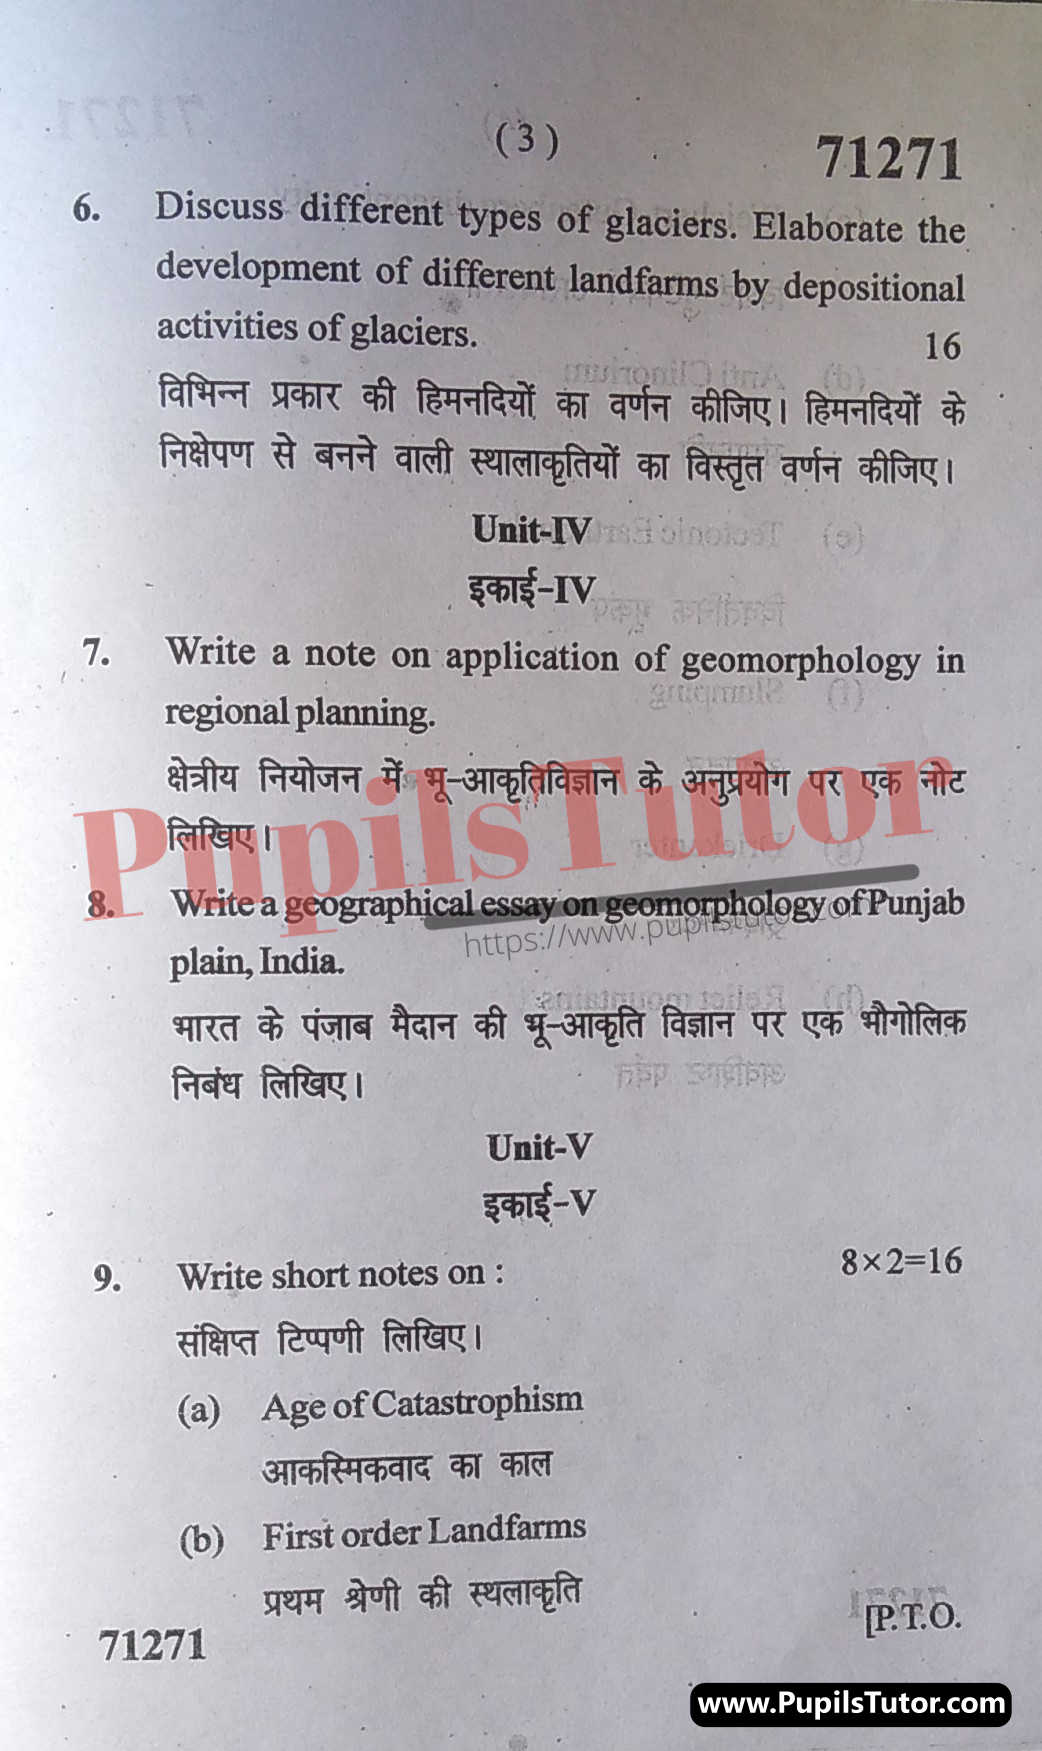 Free Download PDF Of M.D. University M.A. [Geography] First Semester Latest Question Paper For Geomorphology Subject (Page 3) - https://www.pupilstutor.com